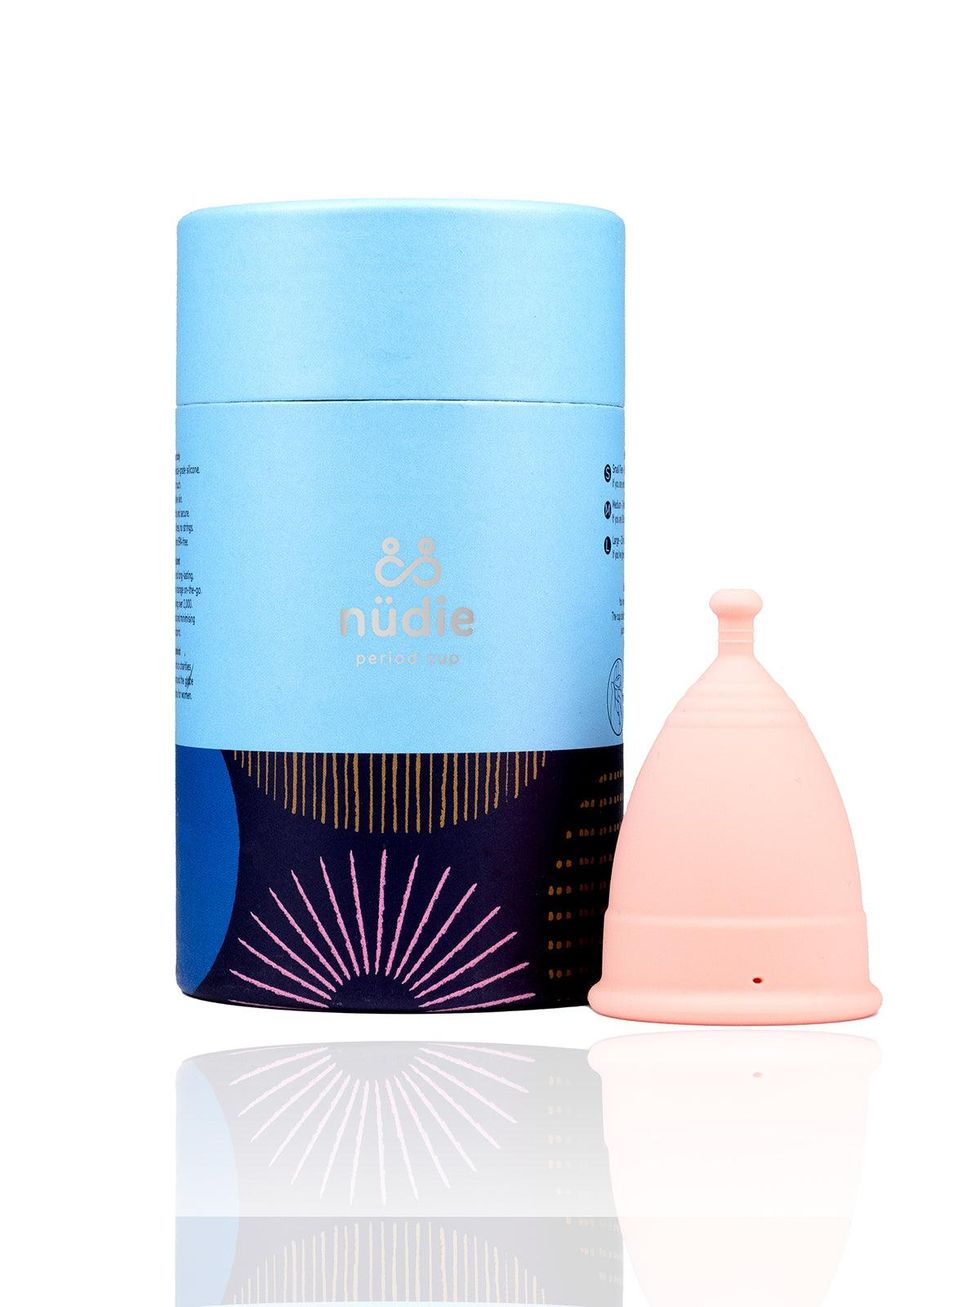 Nudie Reusable Eco-Friendly Period Cup